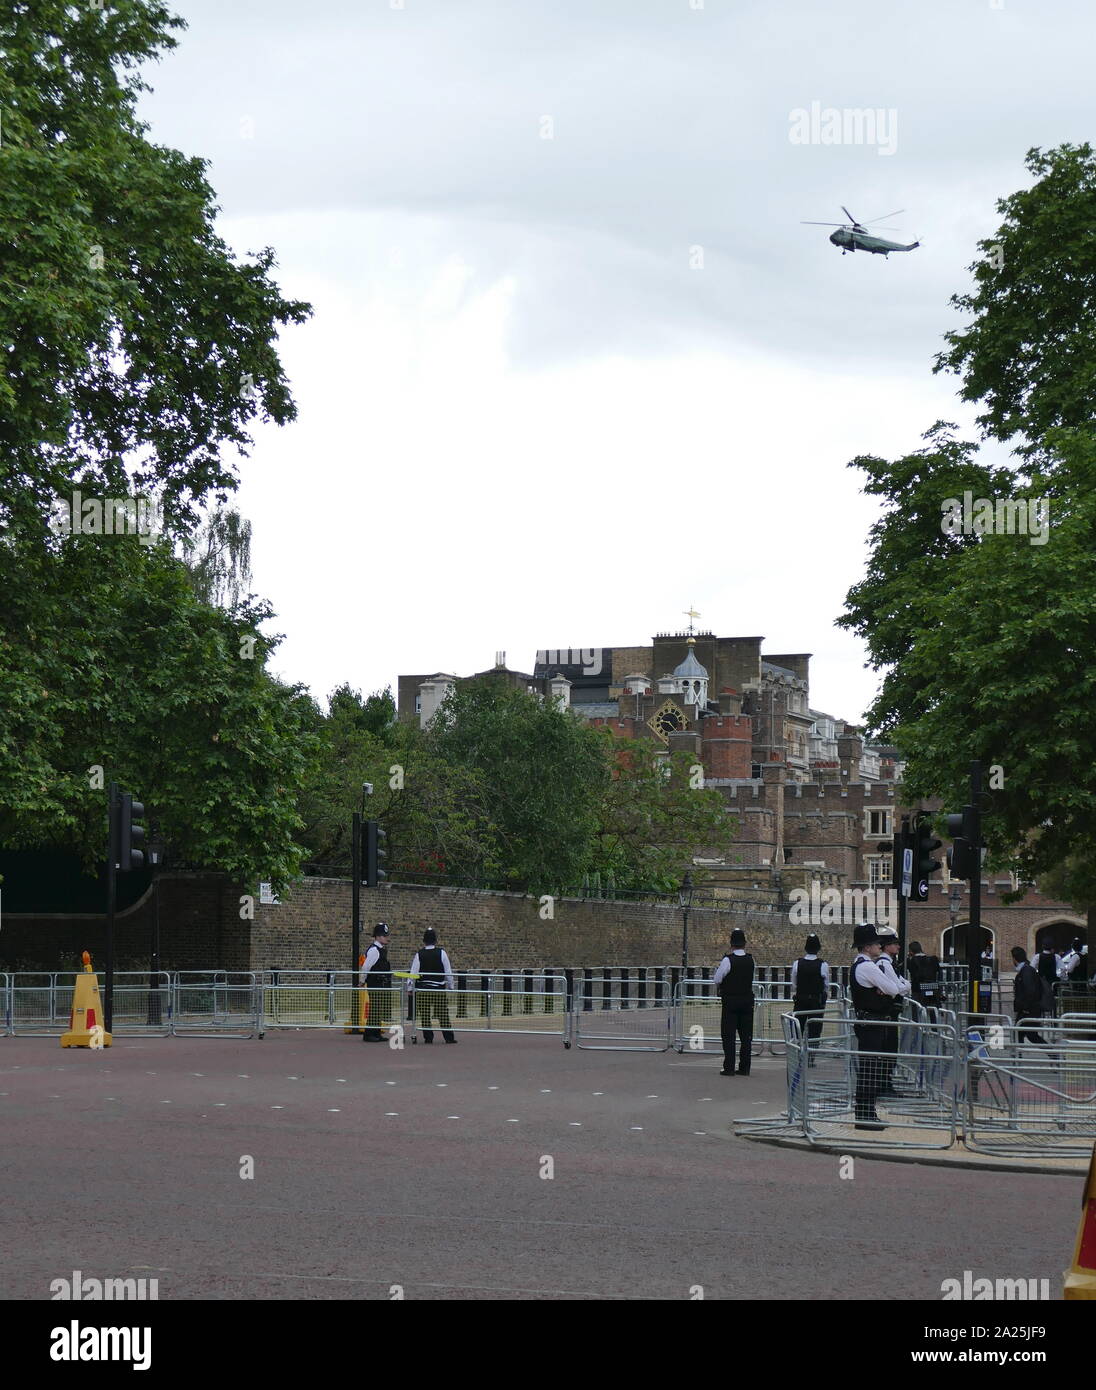 Marine One Helicopter carrying President Trump fly's over on the Mall en route to Buckingham Palace, London, secured by police during the state Visit for President Donald Trump June 2019 Stock Photo